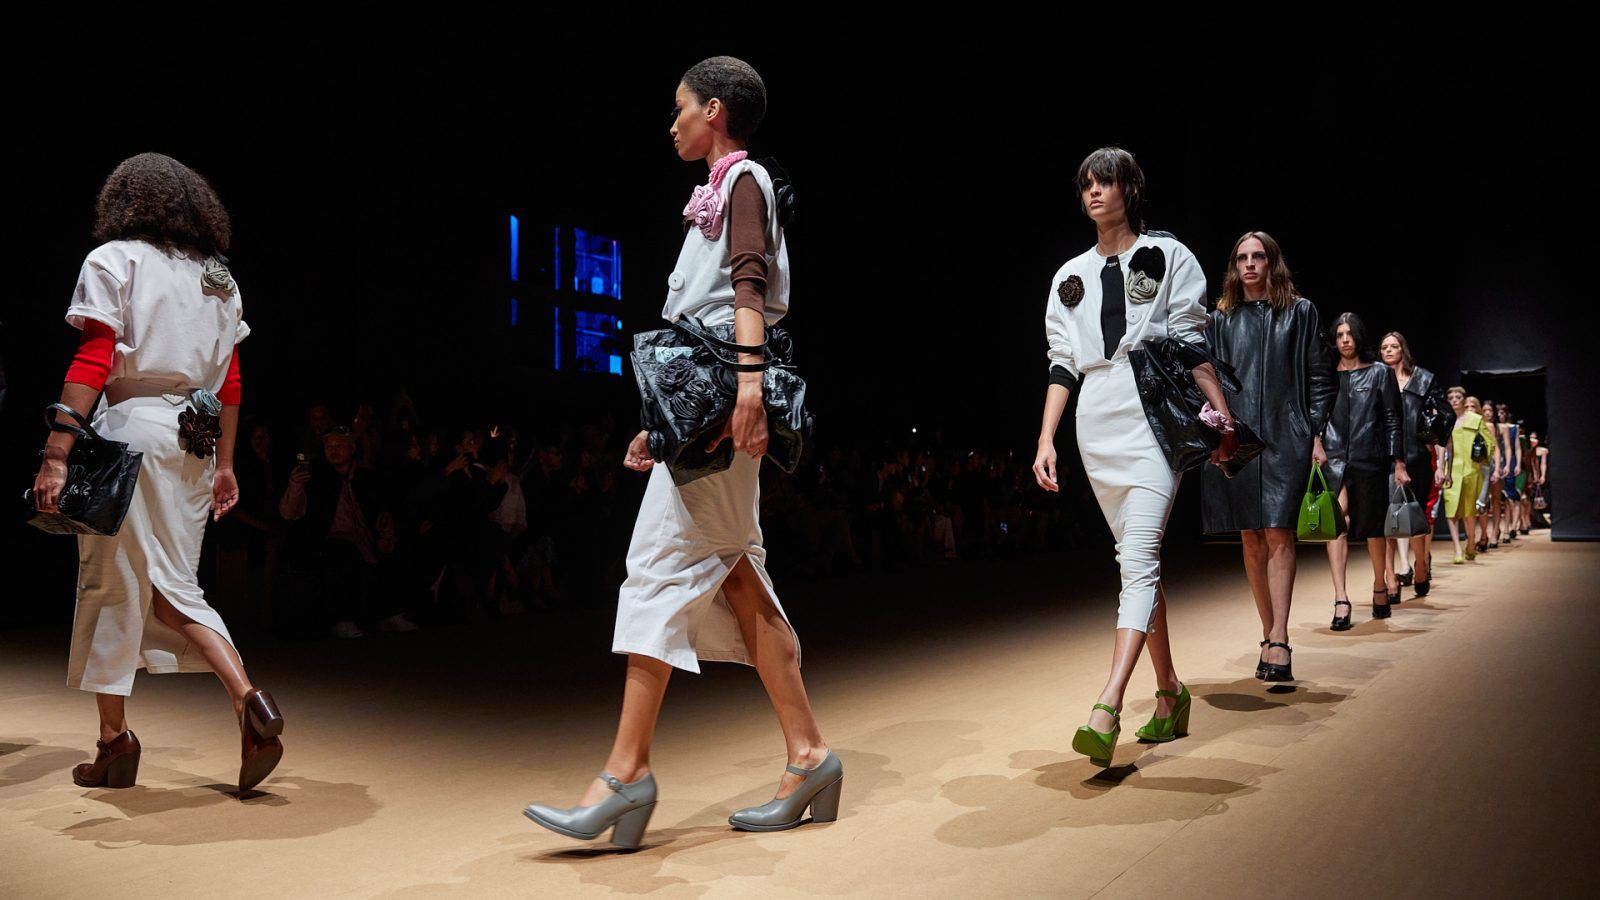 Every Look from Prada Spring/Summer 2020 – CR Fashion Book